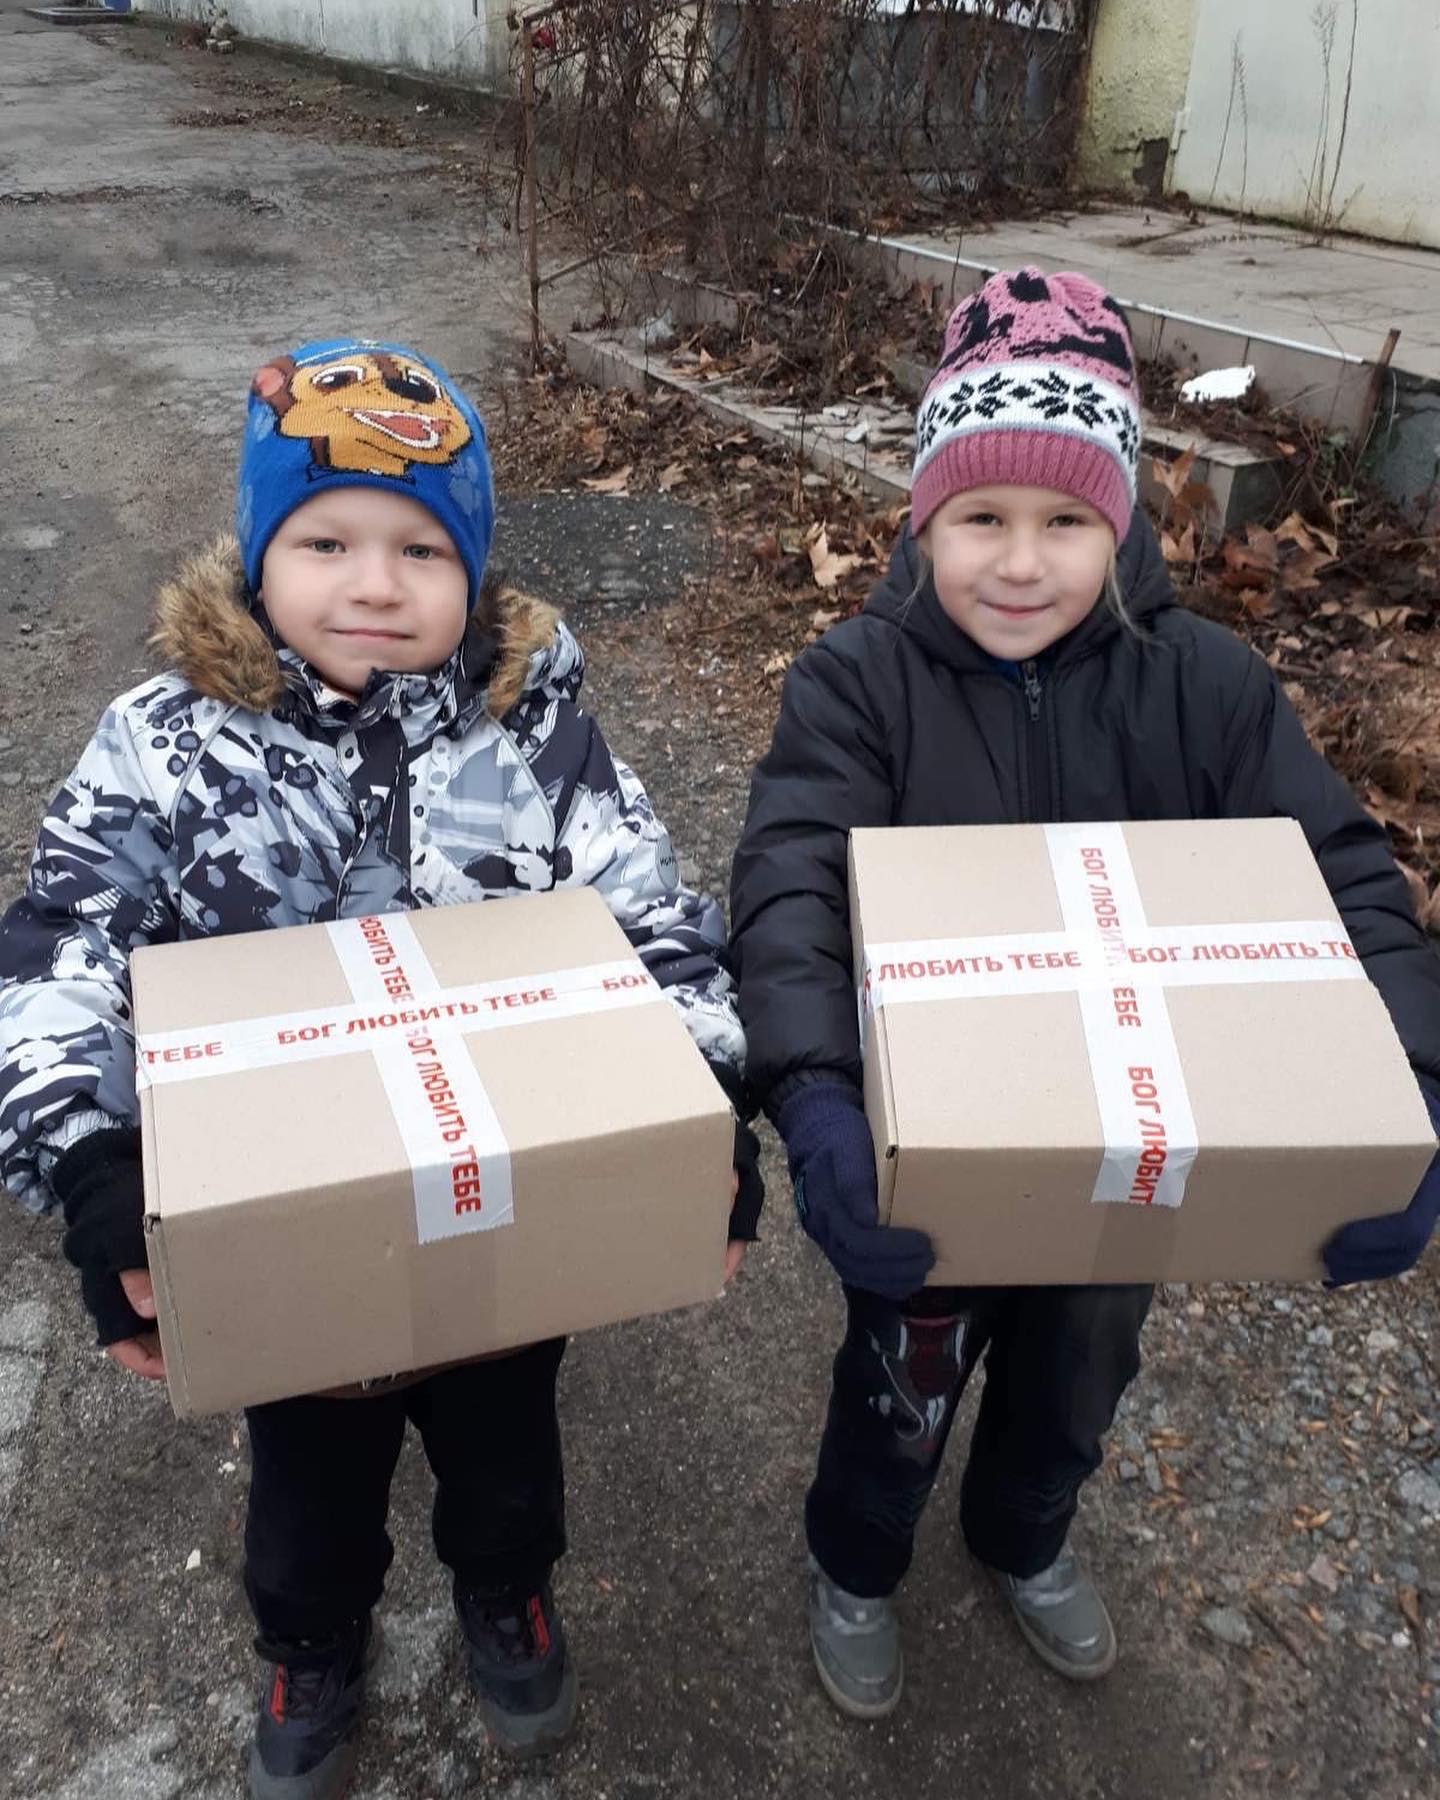 Two boys holding boxes with labels on them.